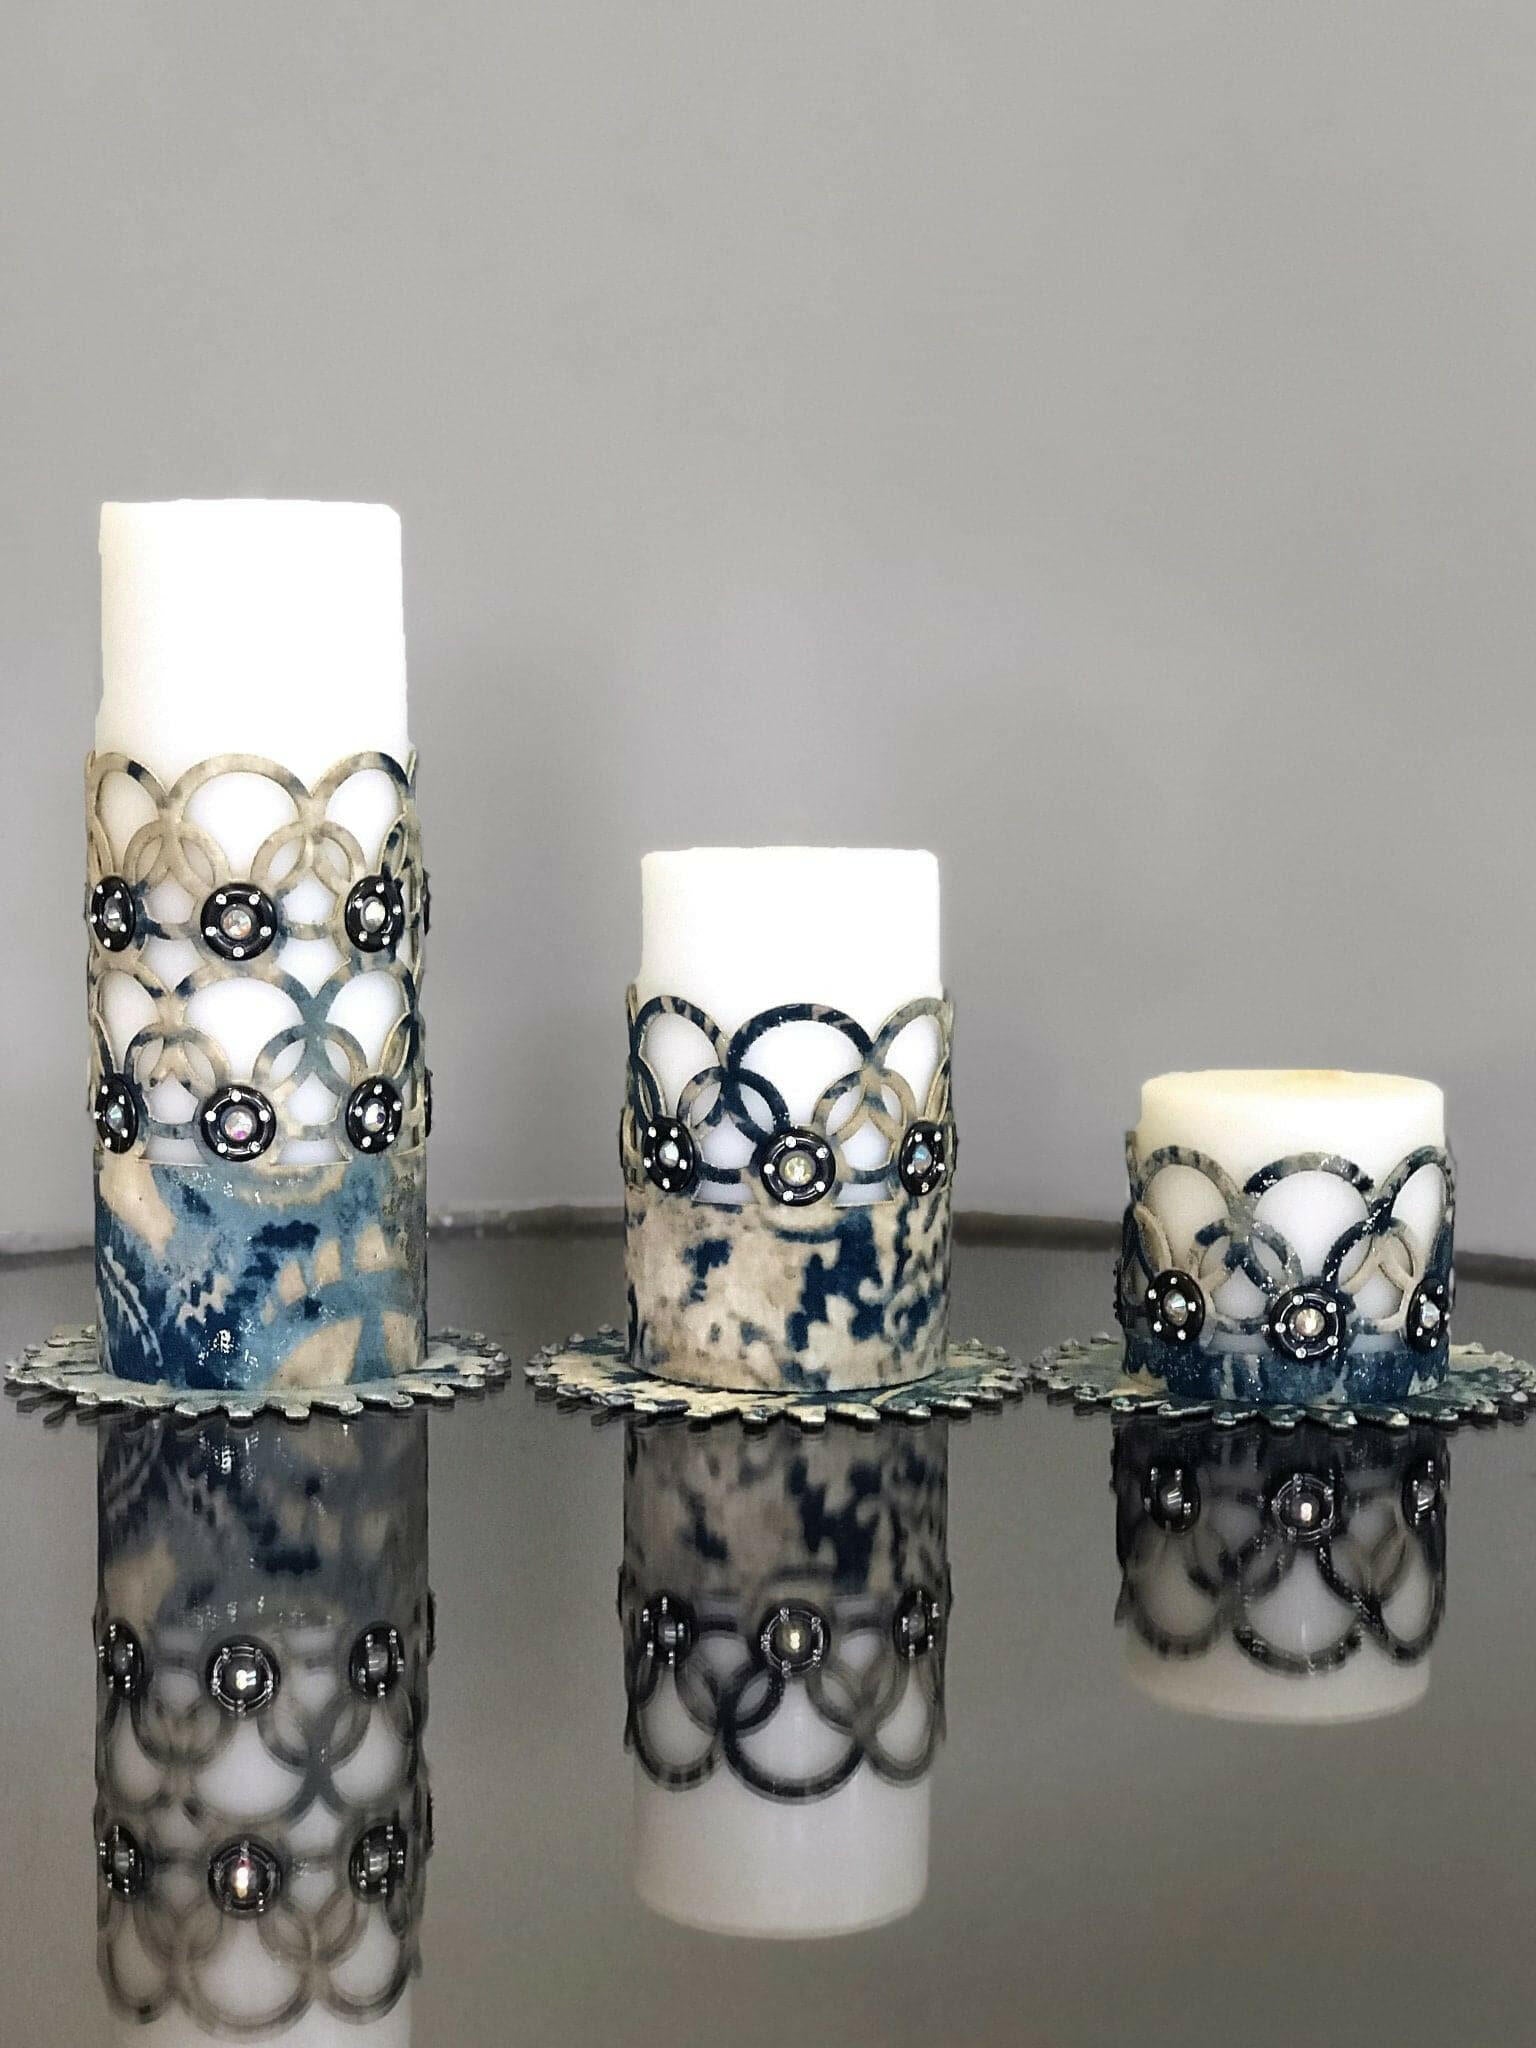 Zerre Turquoise Ecru Luxury Candle Set of 3, Leather Circular Pattern, Decorative Glamorous Candles by Creative Home,CS-CH-ZRRE-TuEc